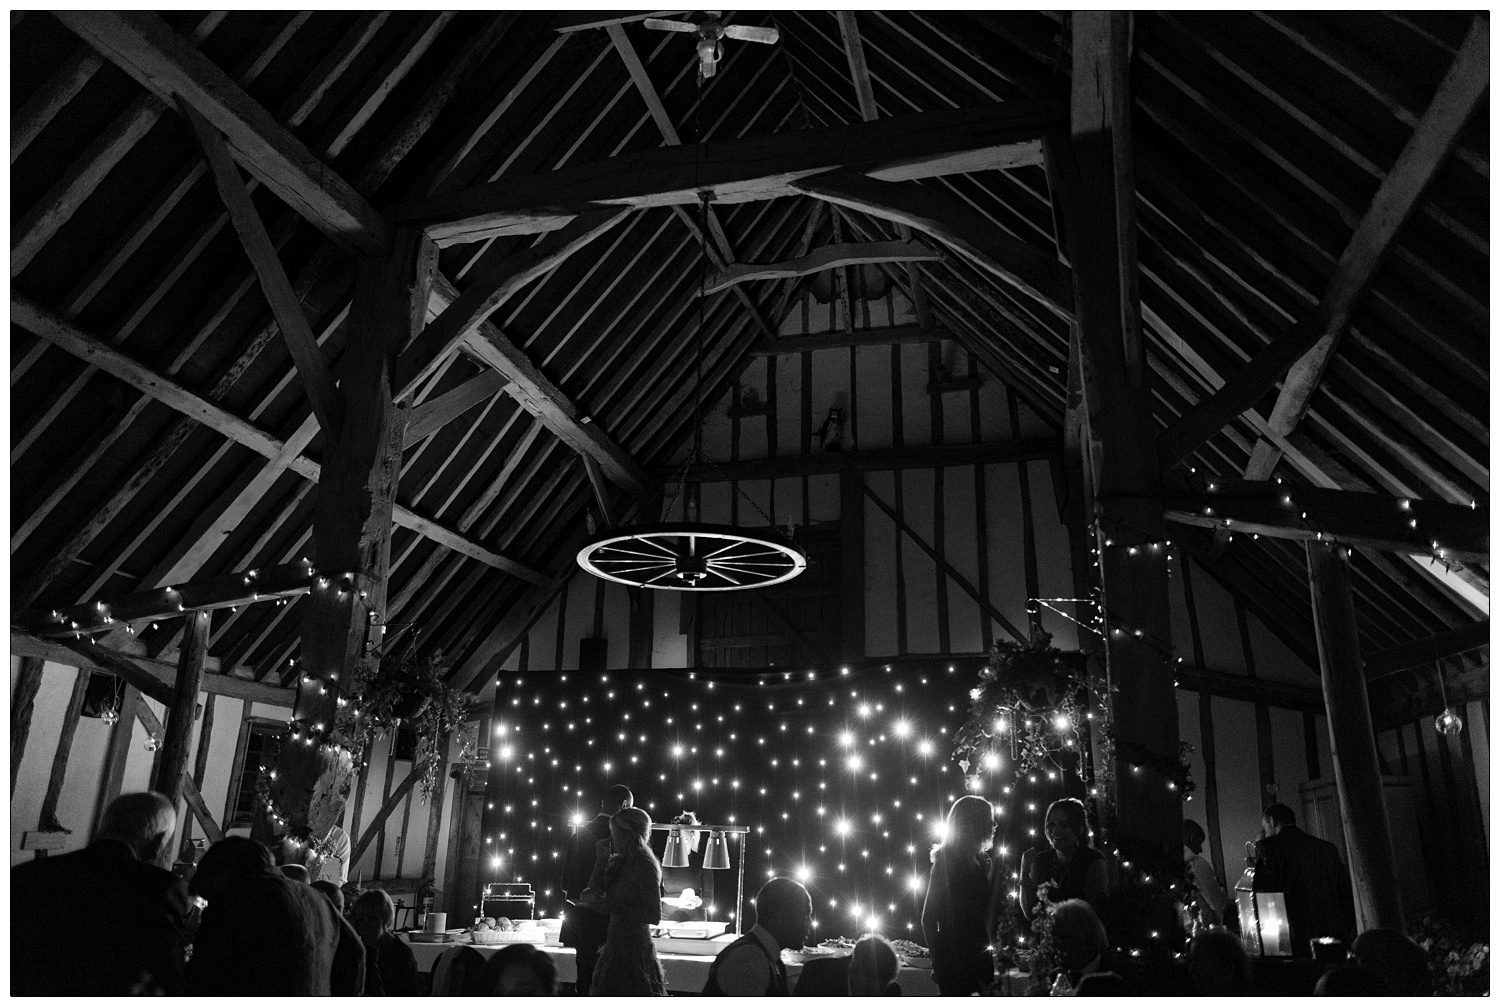 The view of Pledgdon Barn at night. There is a wall of lights behind a buffet table. People are walking around and chatting.